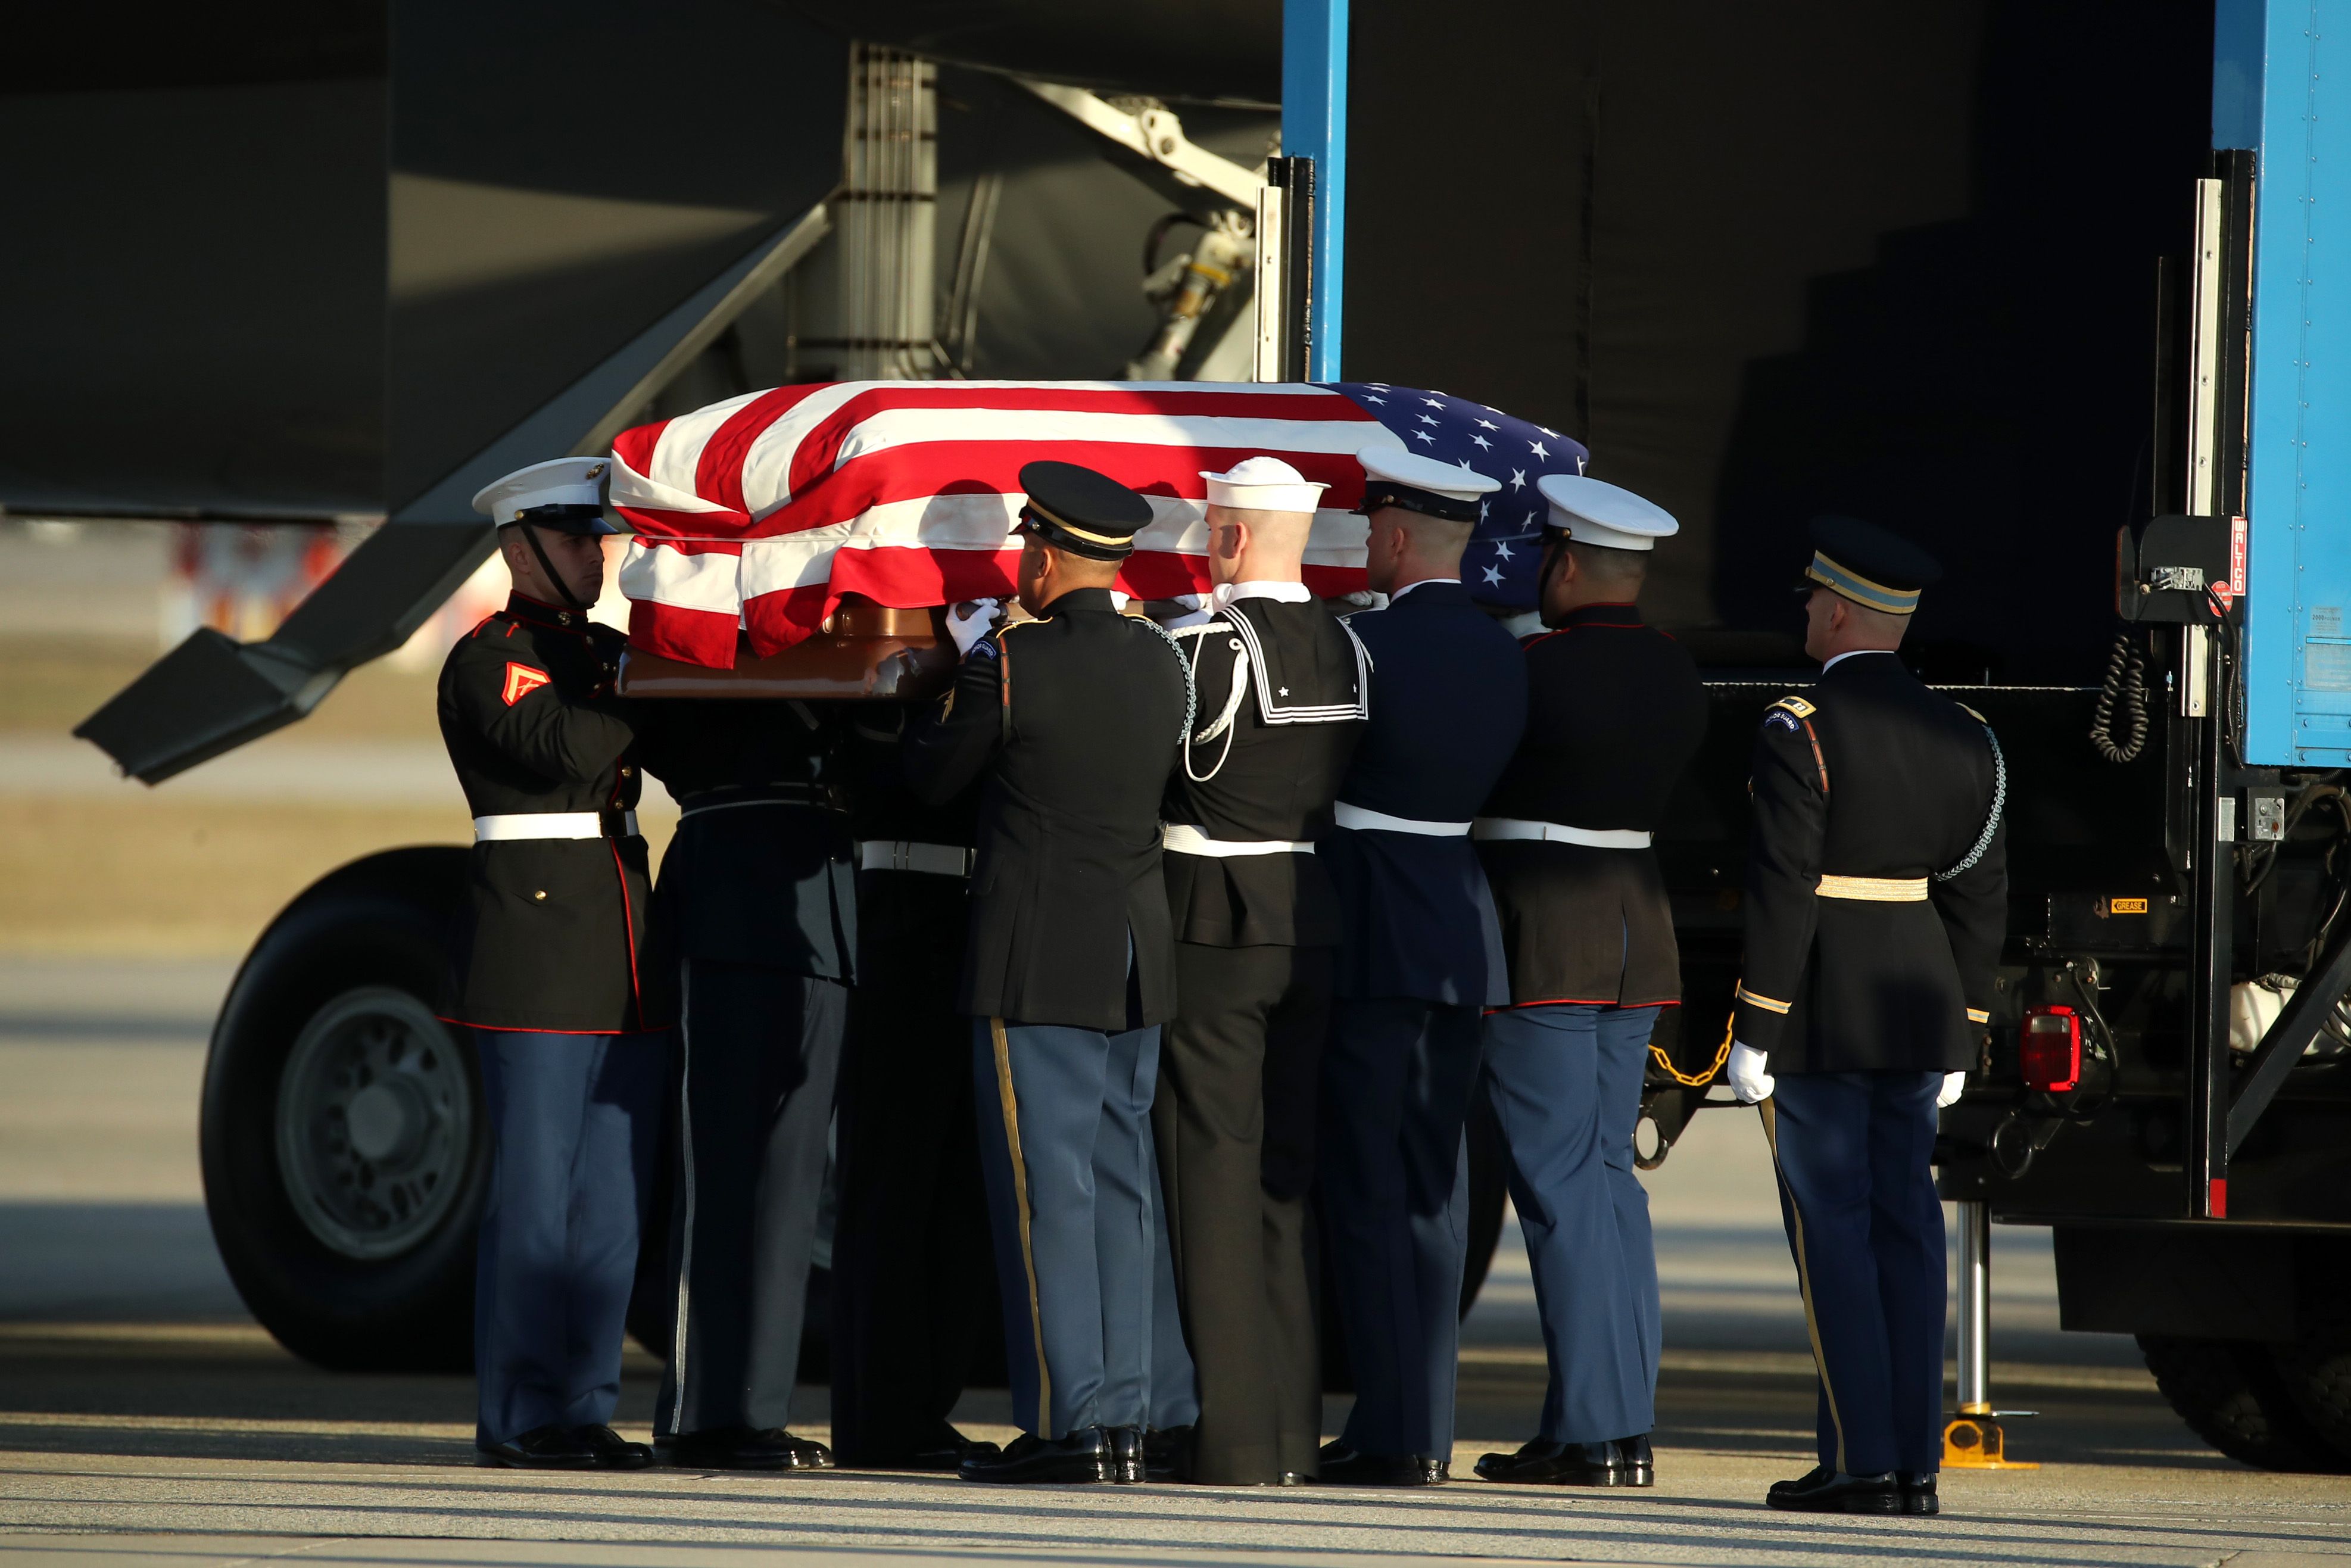 George H. W. Bush's casket carried as 21-gun salute sounded.